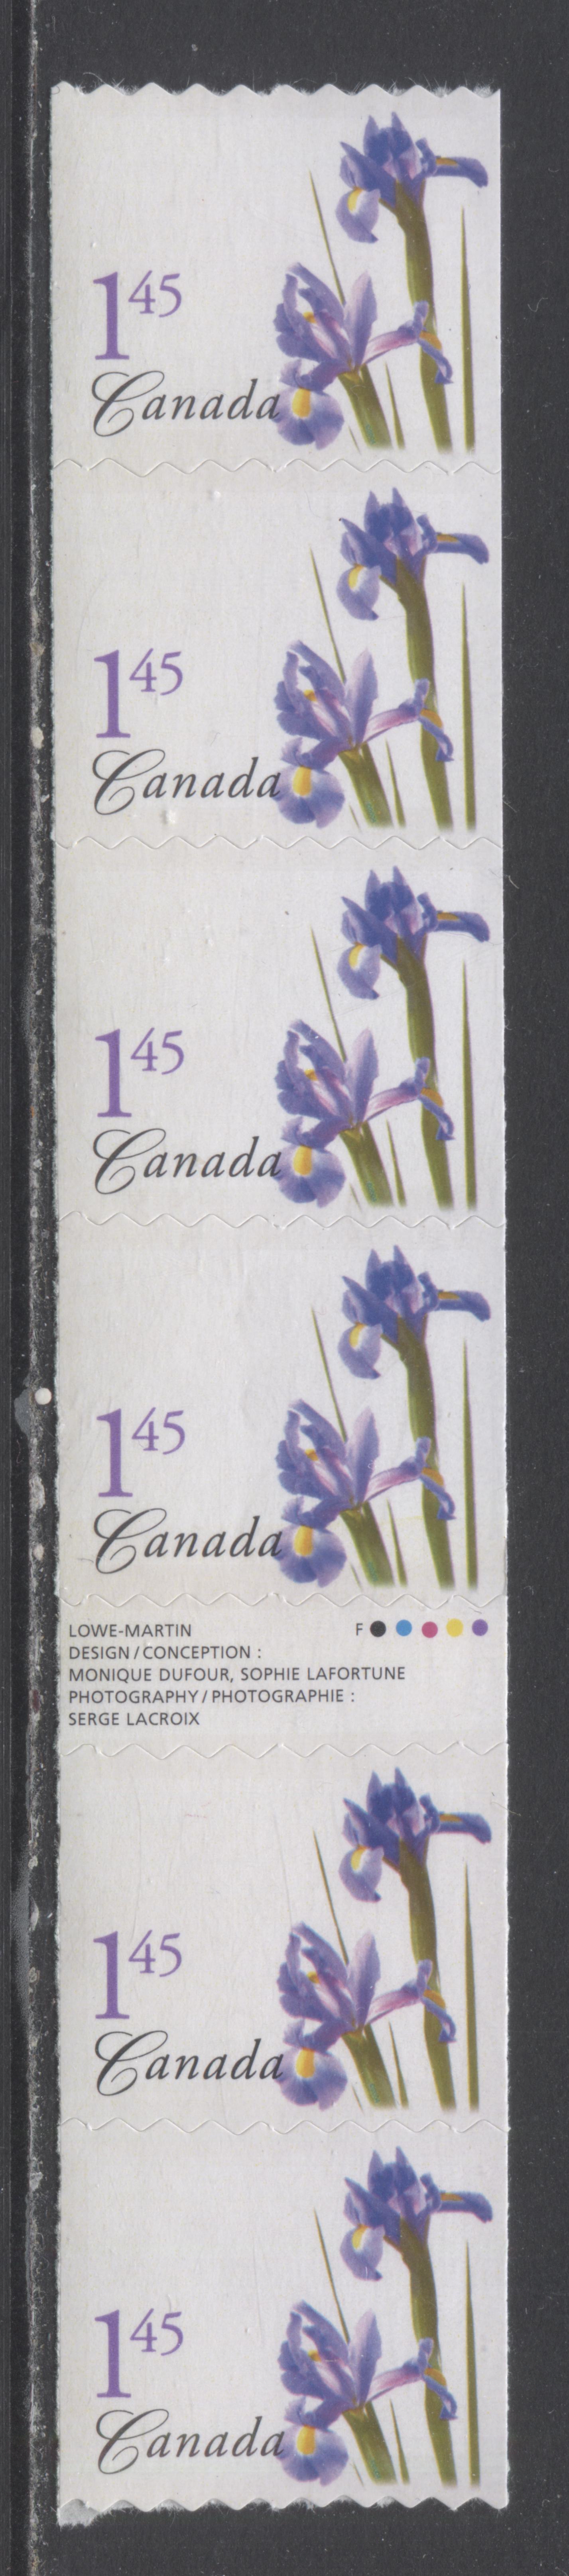 Lot 22 Canada #2074iii $1.45 Multicolored Purple Dutch Iris, 2004-2005 Flower Definitives (1) Coils Issue, A VFNH Gutter Strip Of 6 On DF Fasson Paper With "F" Over "O" Of Lafortune With Ski-Slope Die Cut On 1st Stamp $50